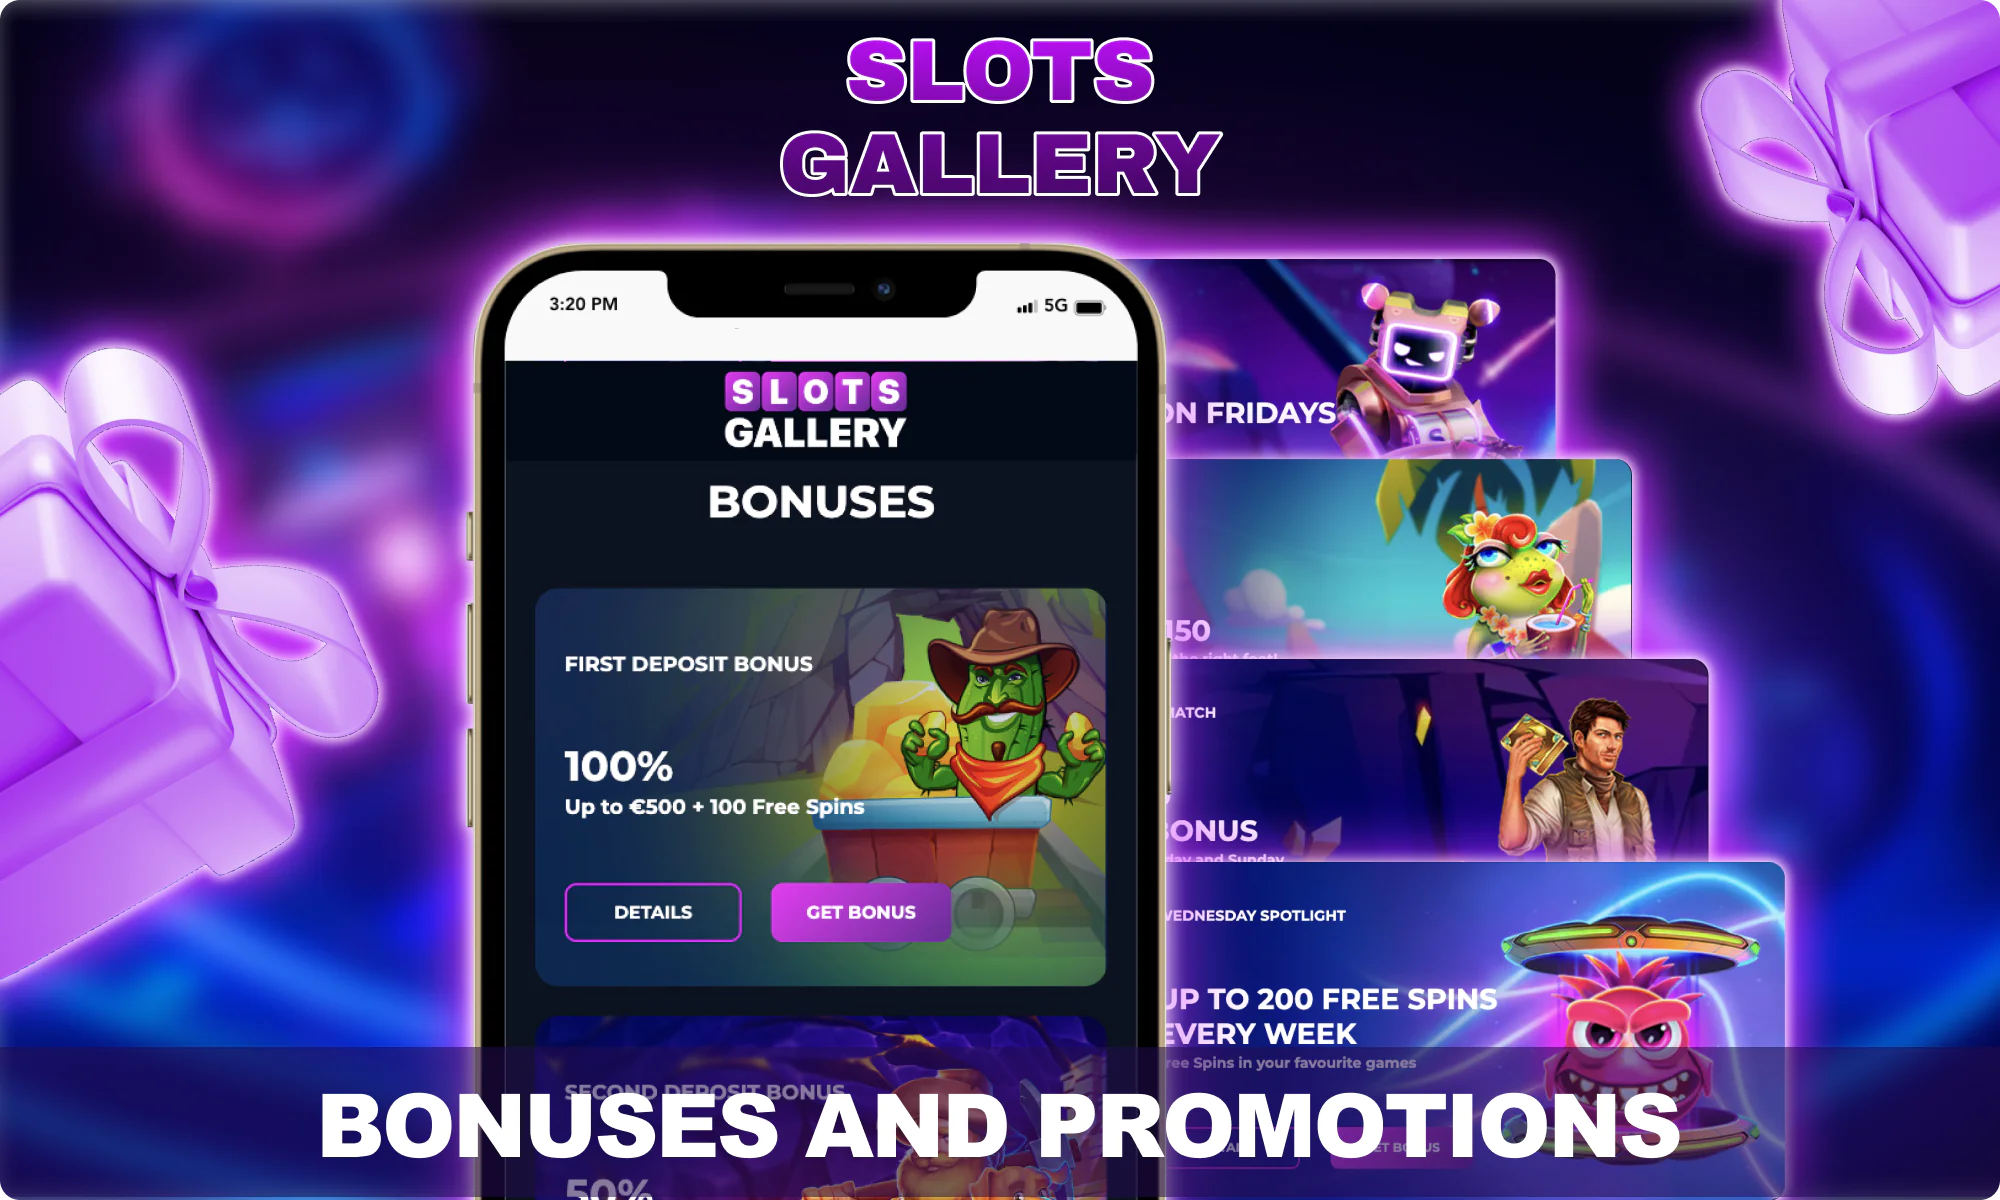 Slots Gallery Promotions and Bonuses